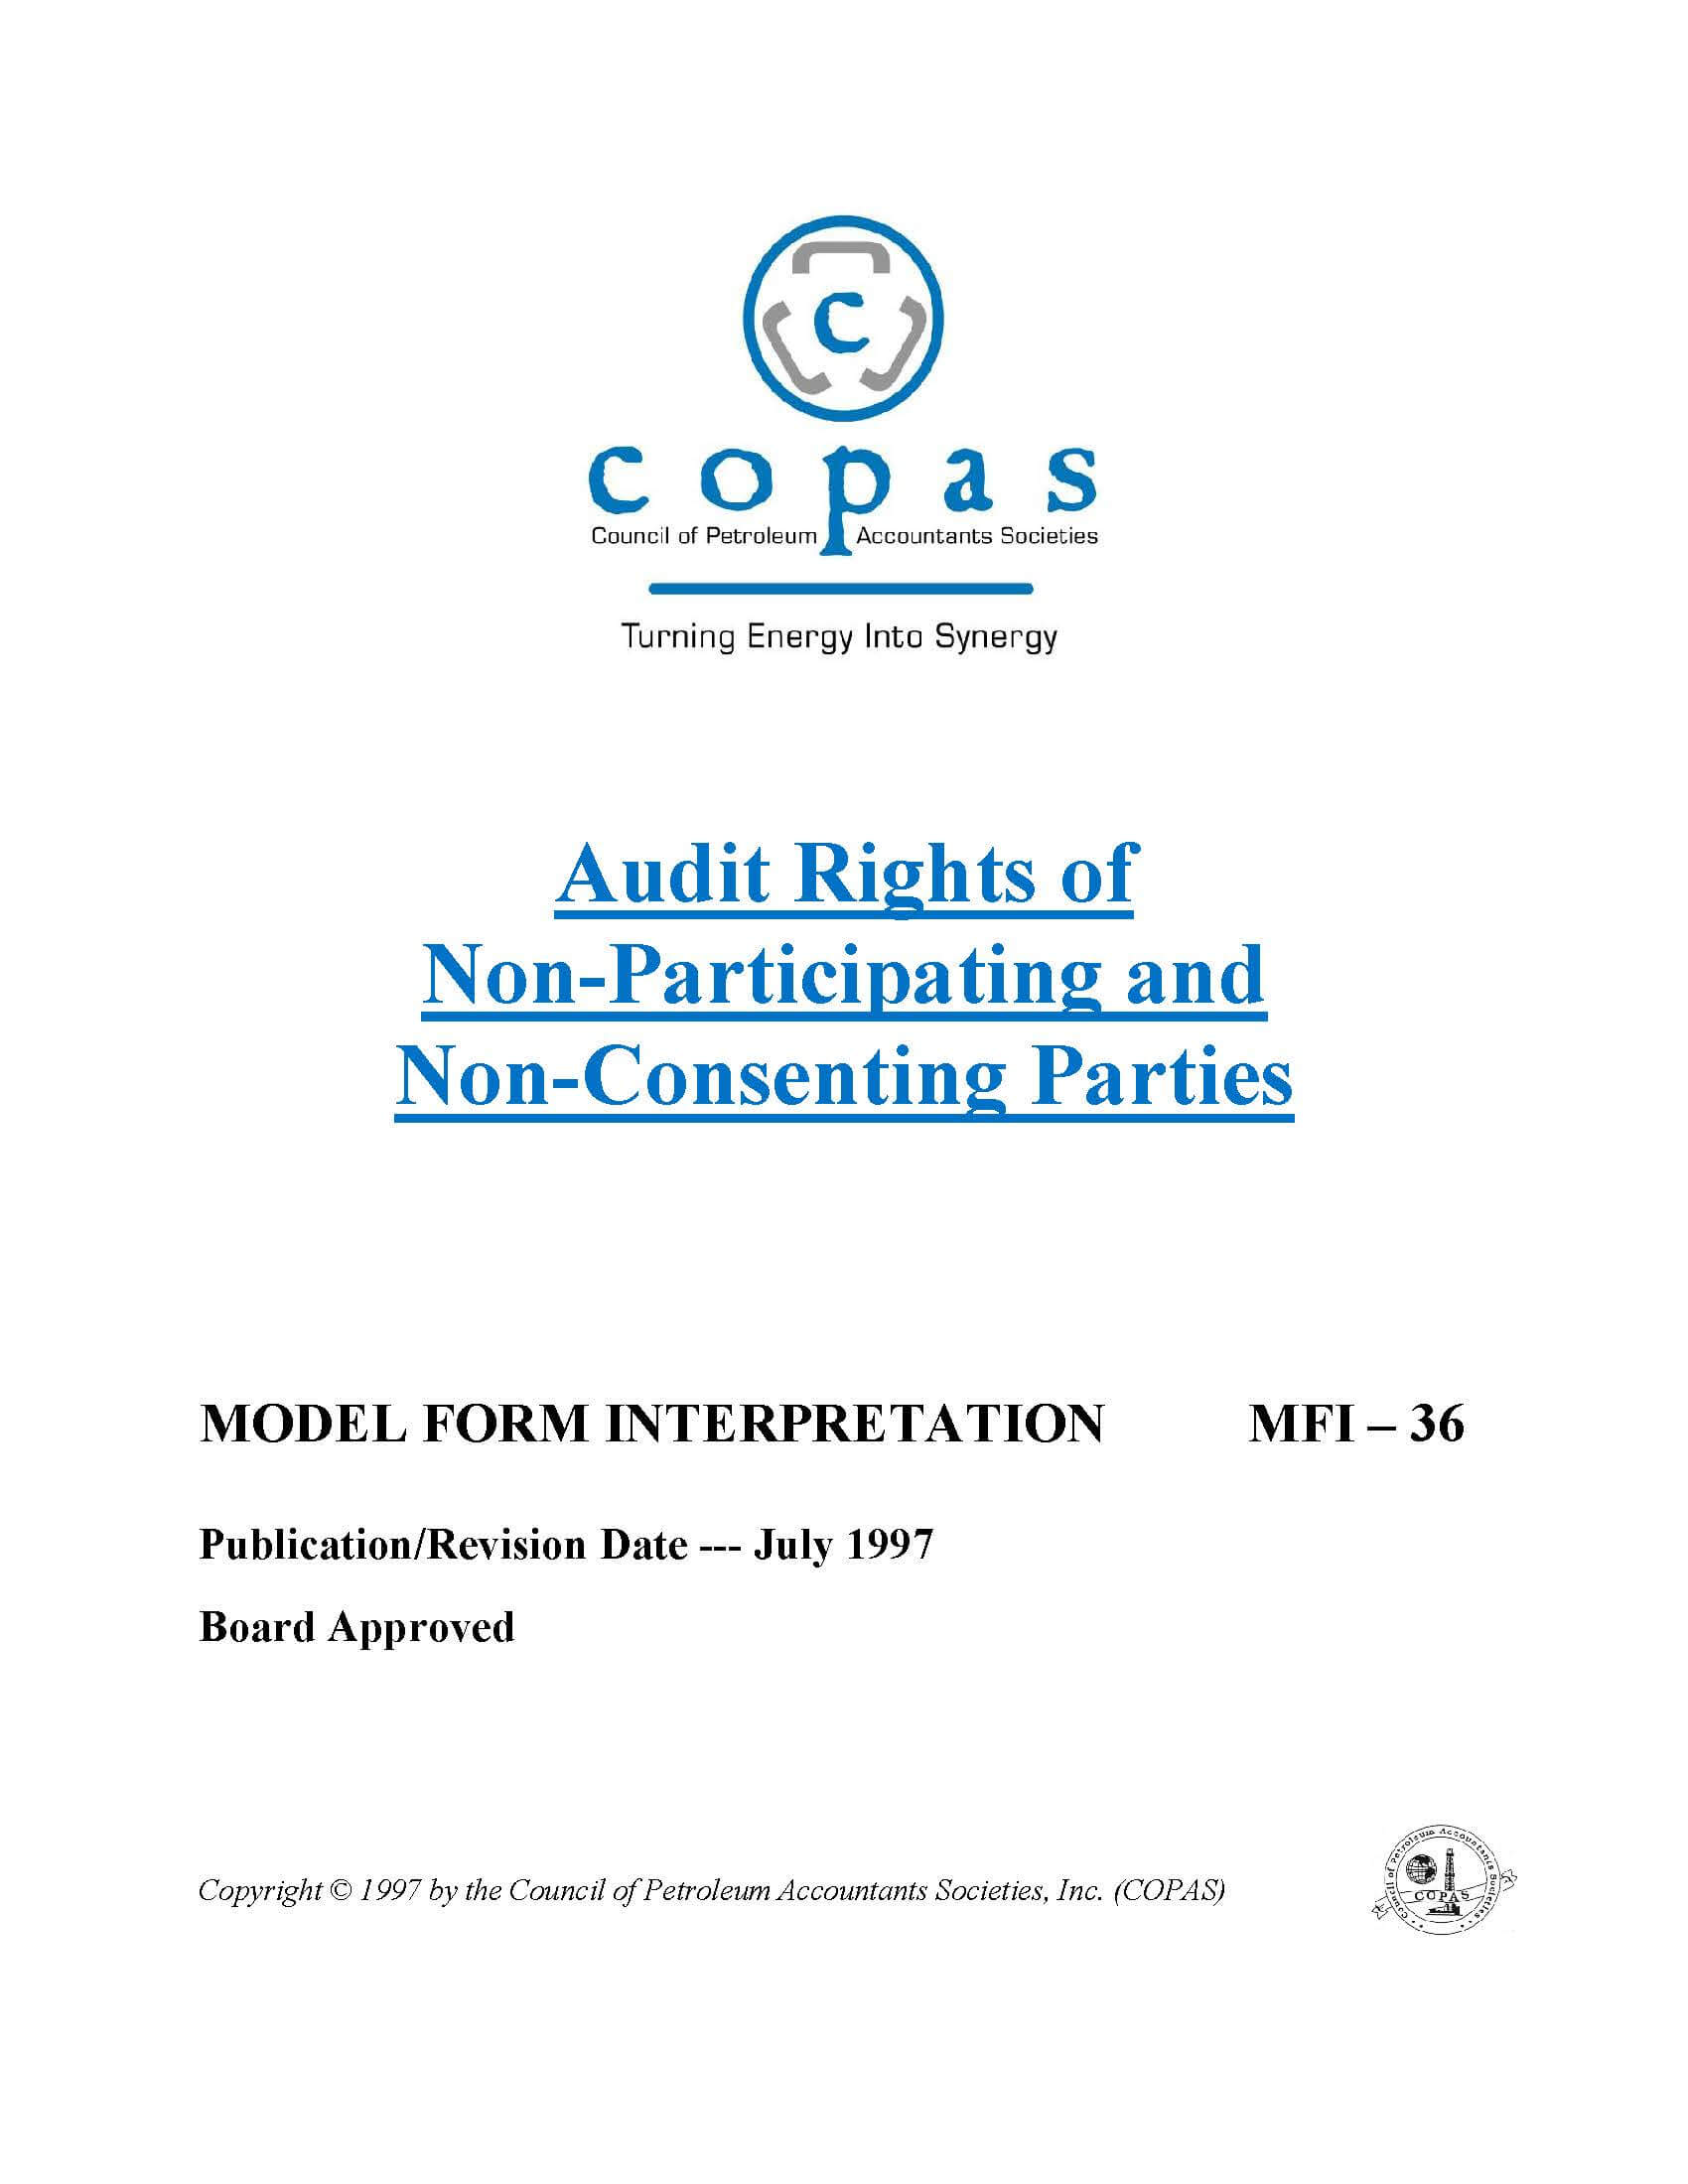 MFI-36 Audit Rights of Non Participating and Non Consenting Parties - products MFI 36 Audit Rights Non Participating Non Consenting Parties - Council of Petroleum Accountants Societies